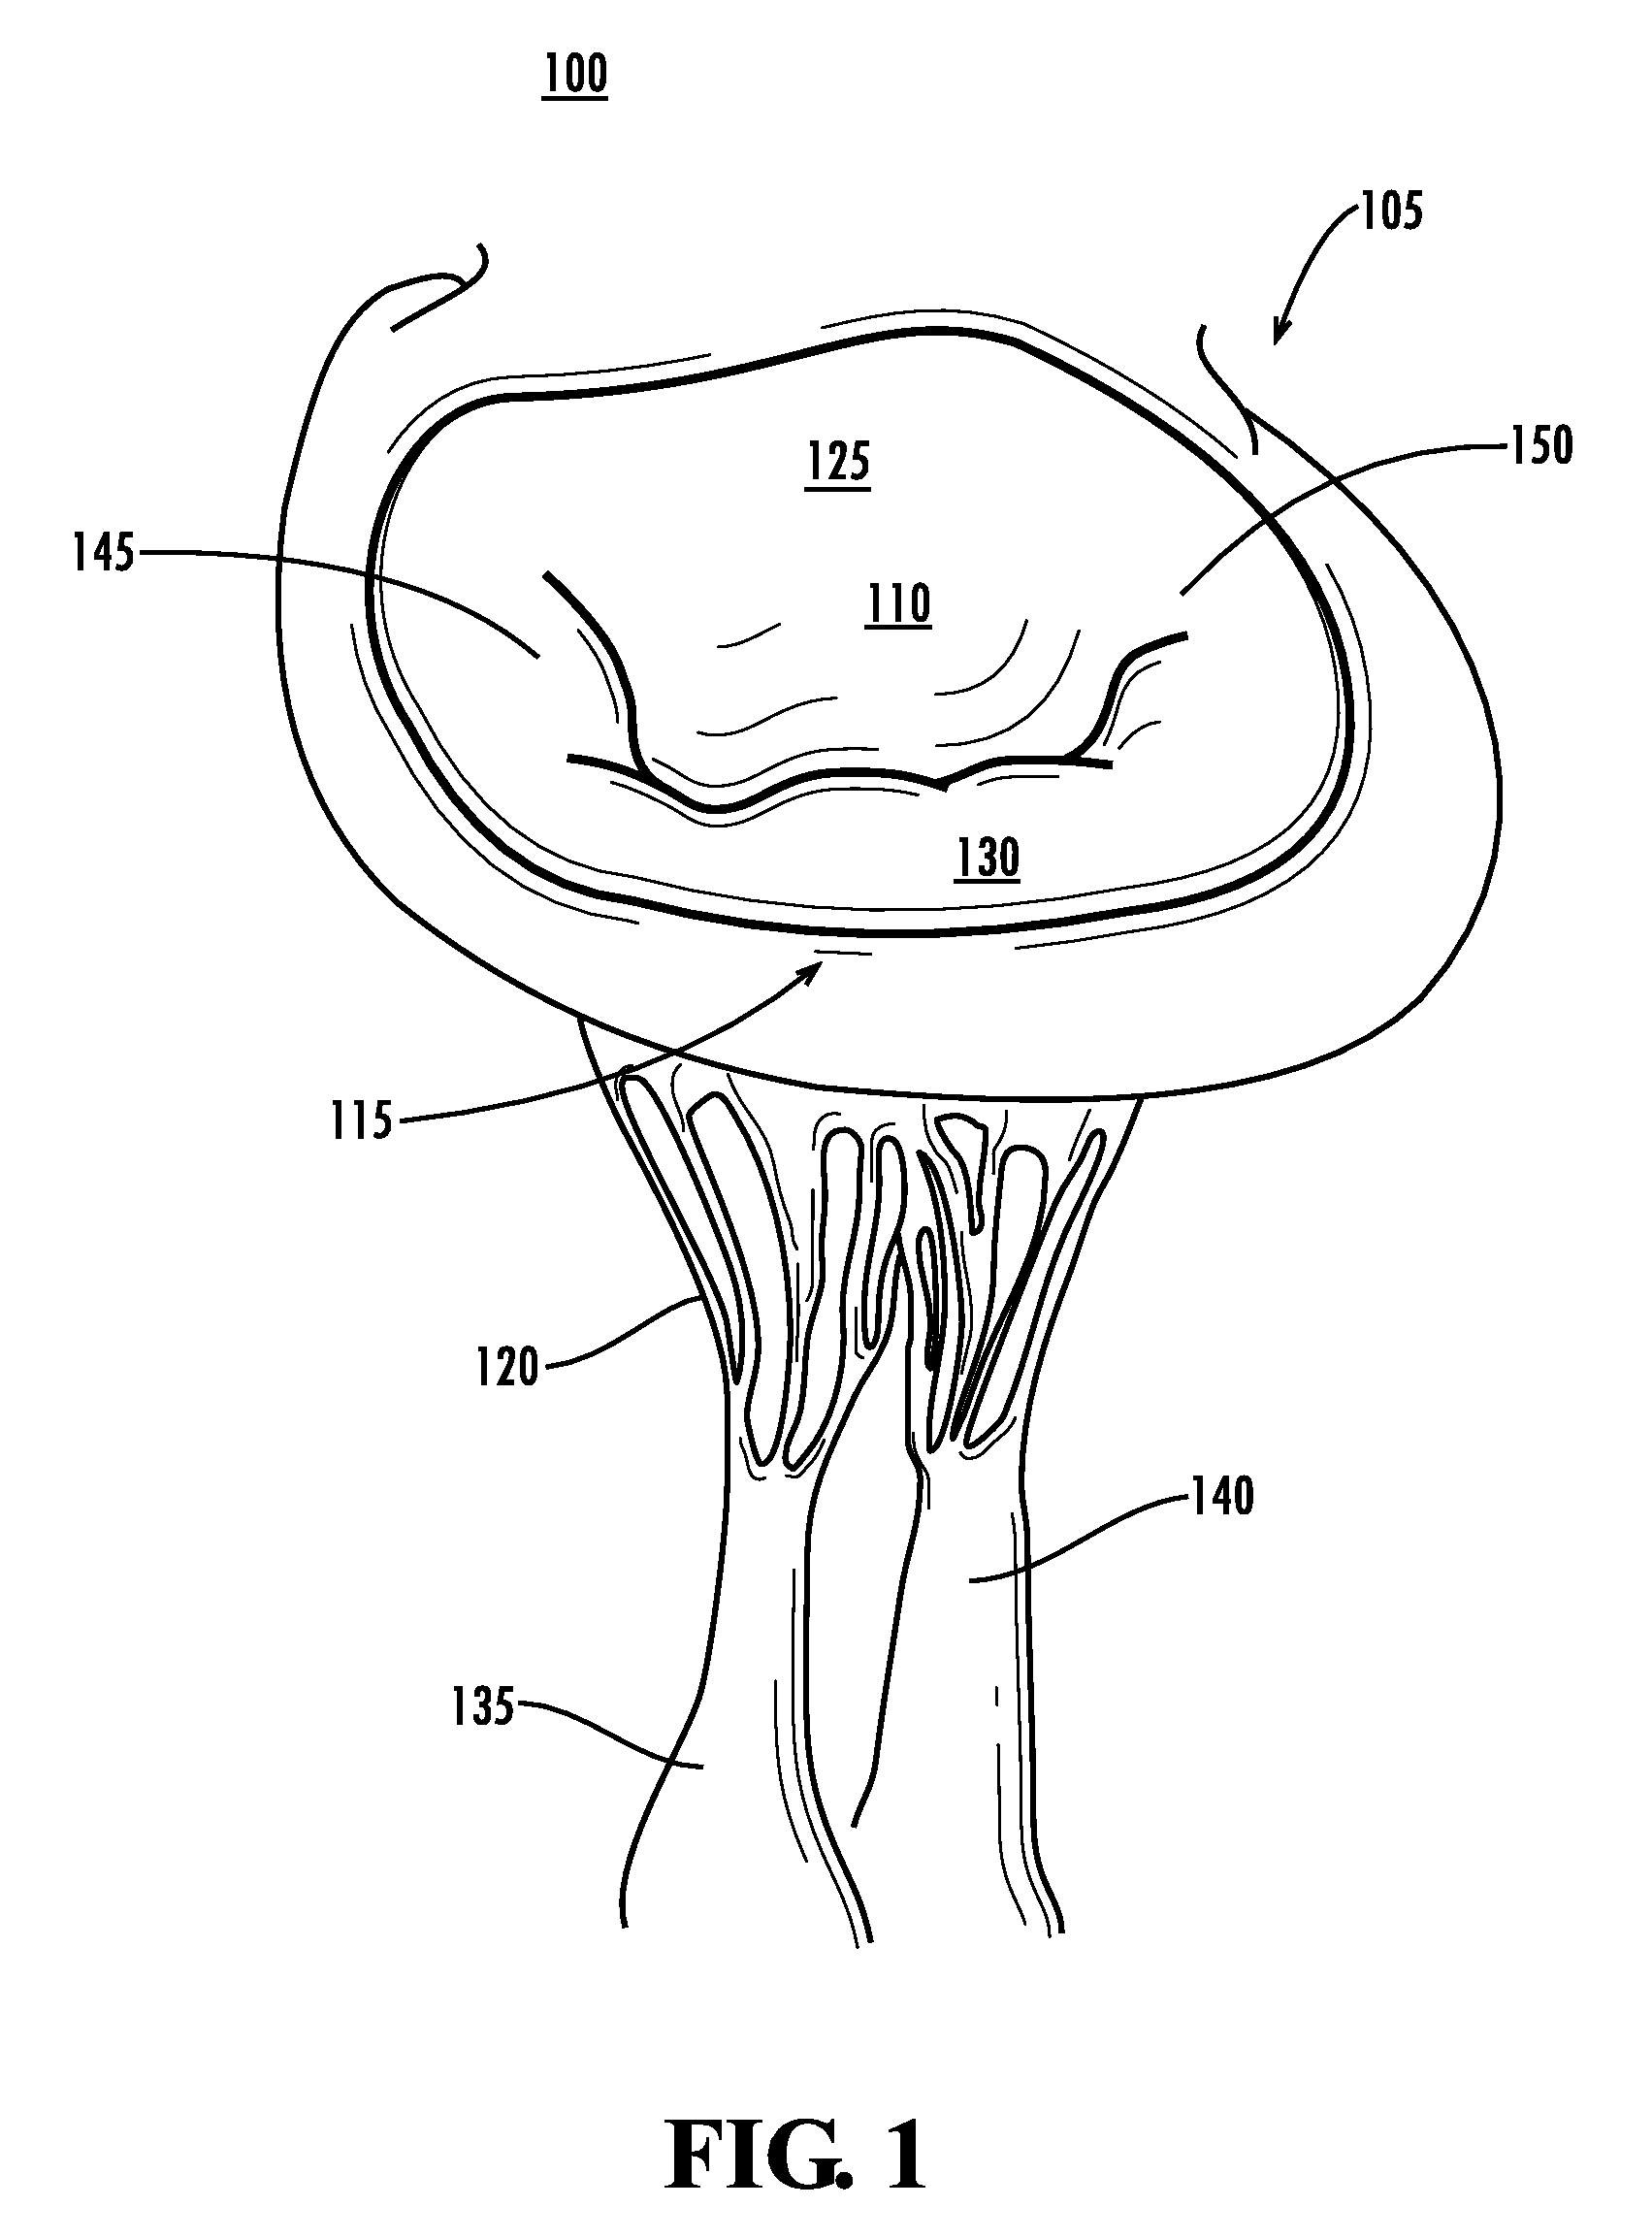 Papillary muscle position control devices, systems, and methods